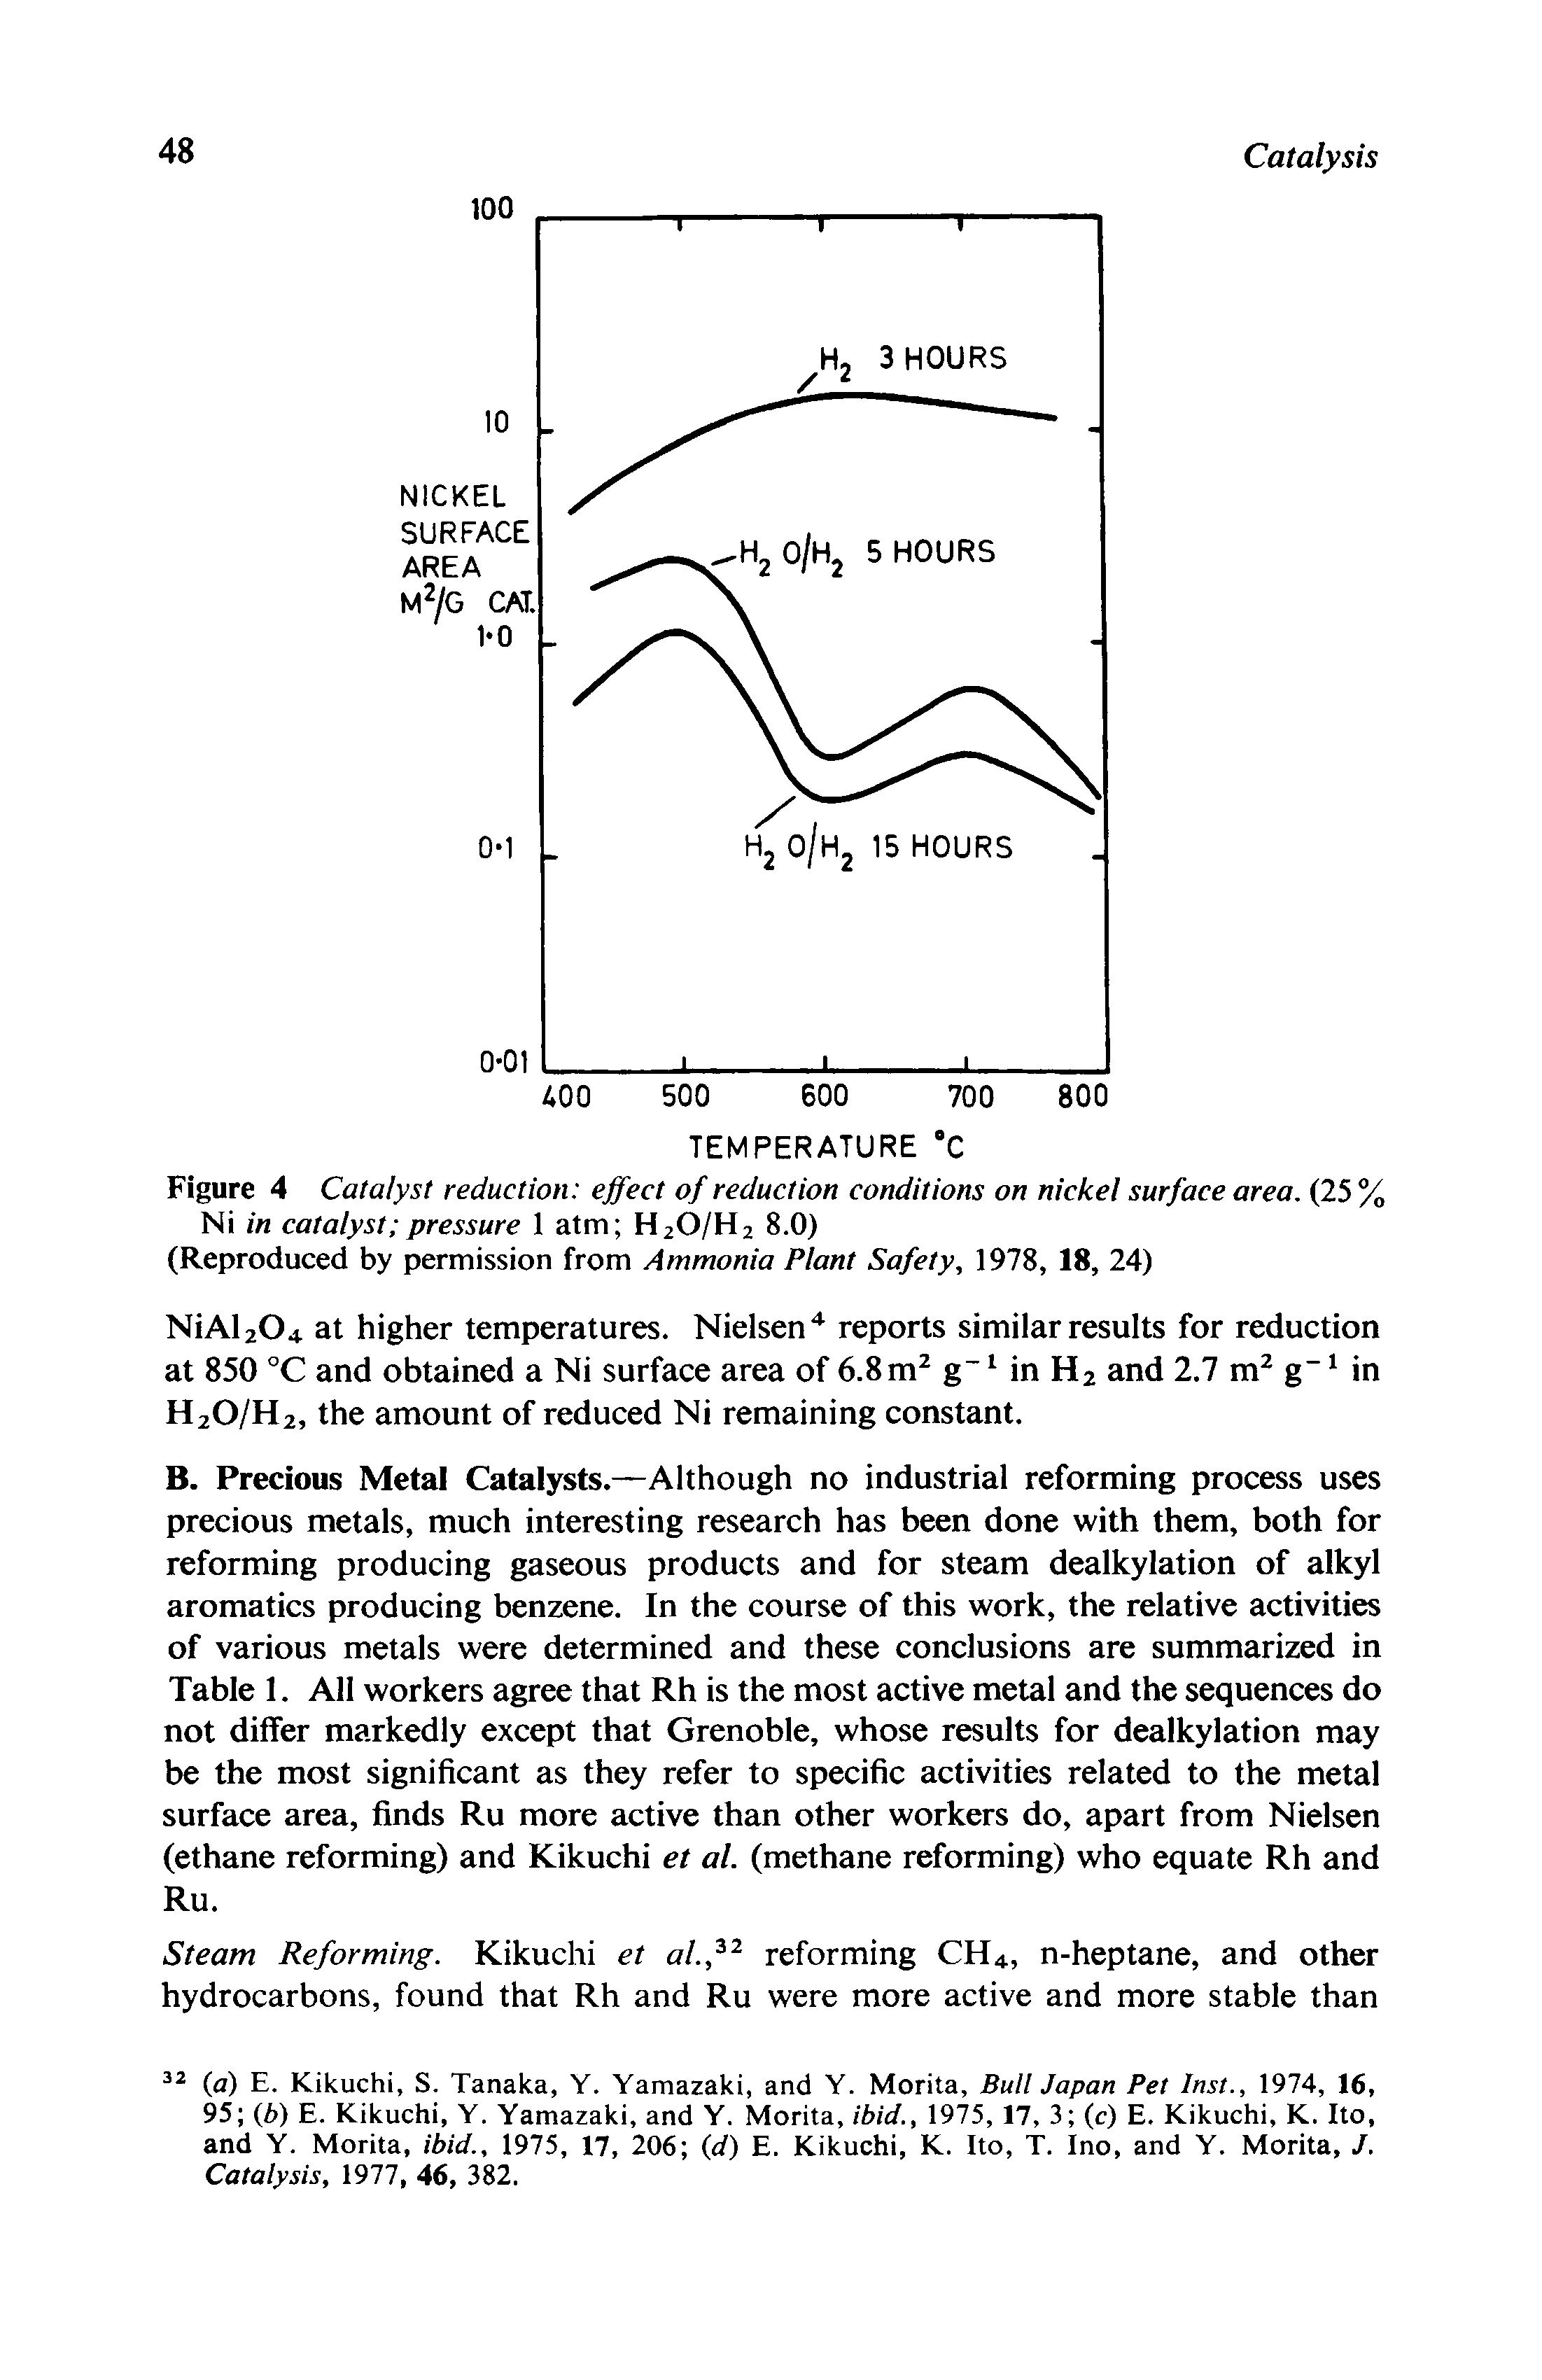 Figure 4 Catalyst reduction effect of reduction conditions on nickel surface area. (25 % Ni in catalyst pressure 1 atm H2O/H2 8.0)...